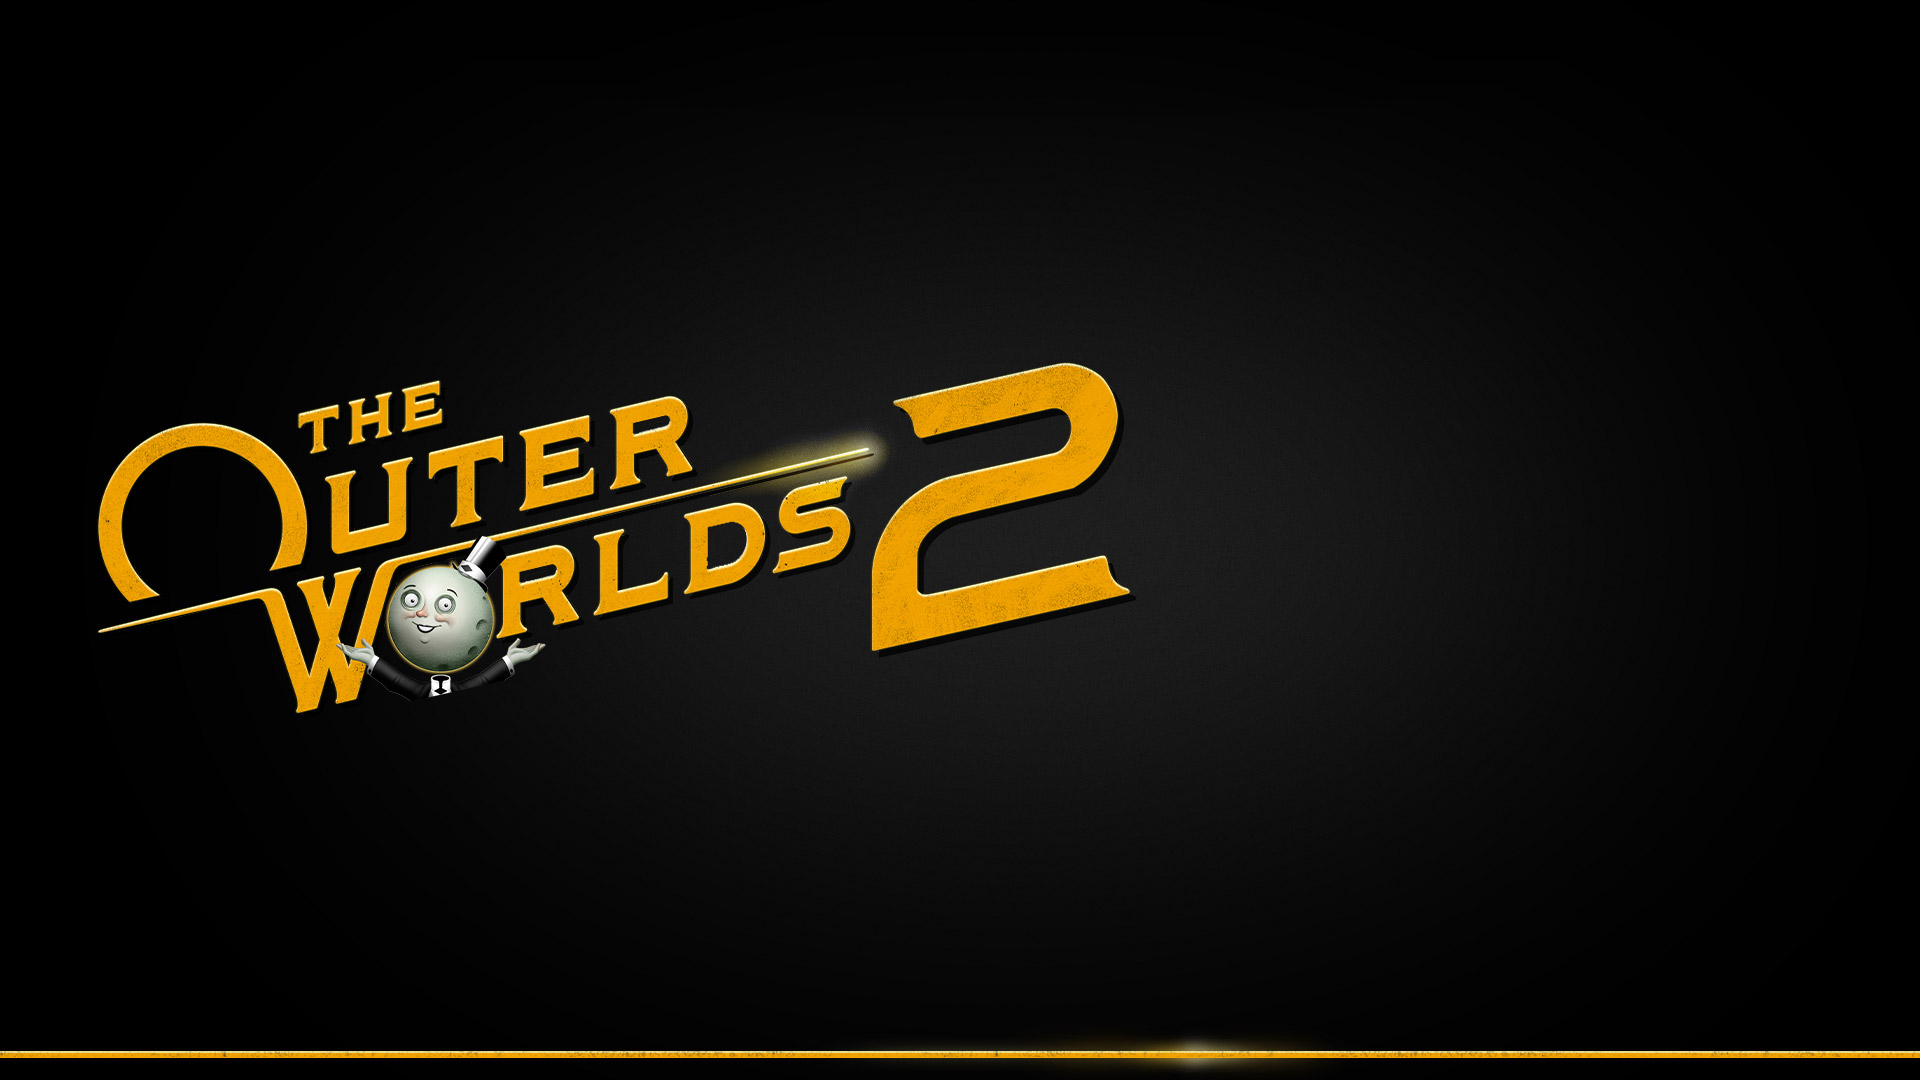 Logótipo de The Outer Worlds 2